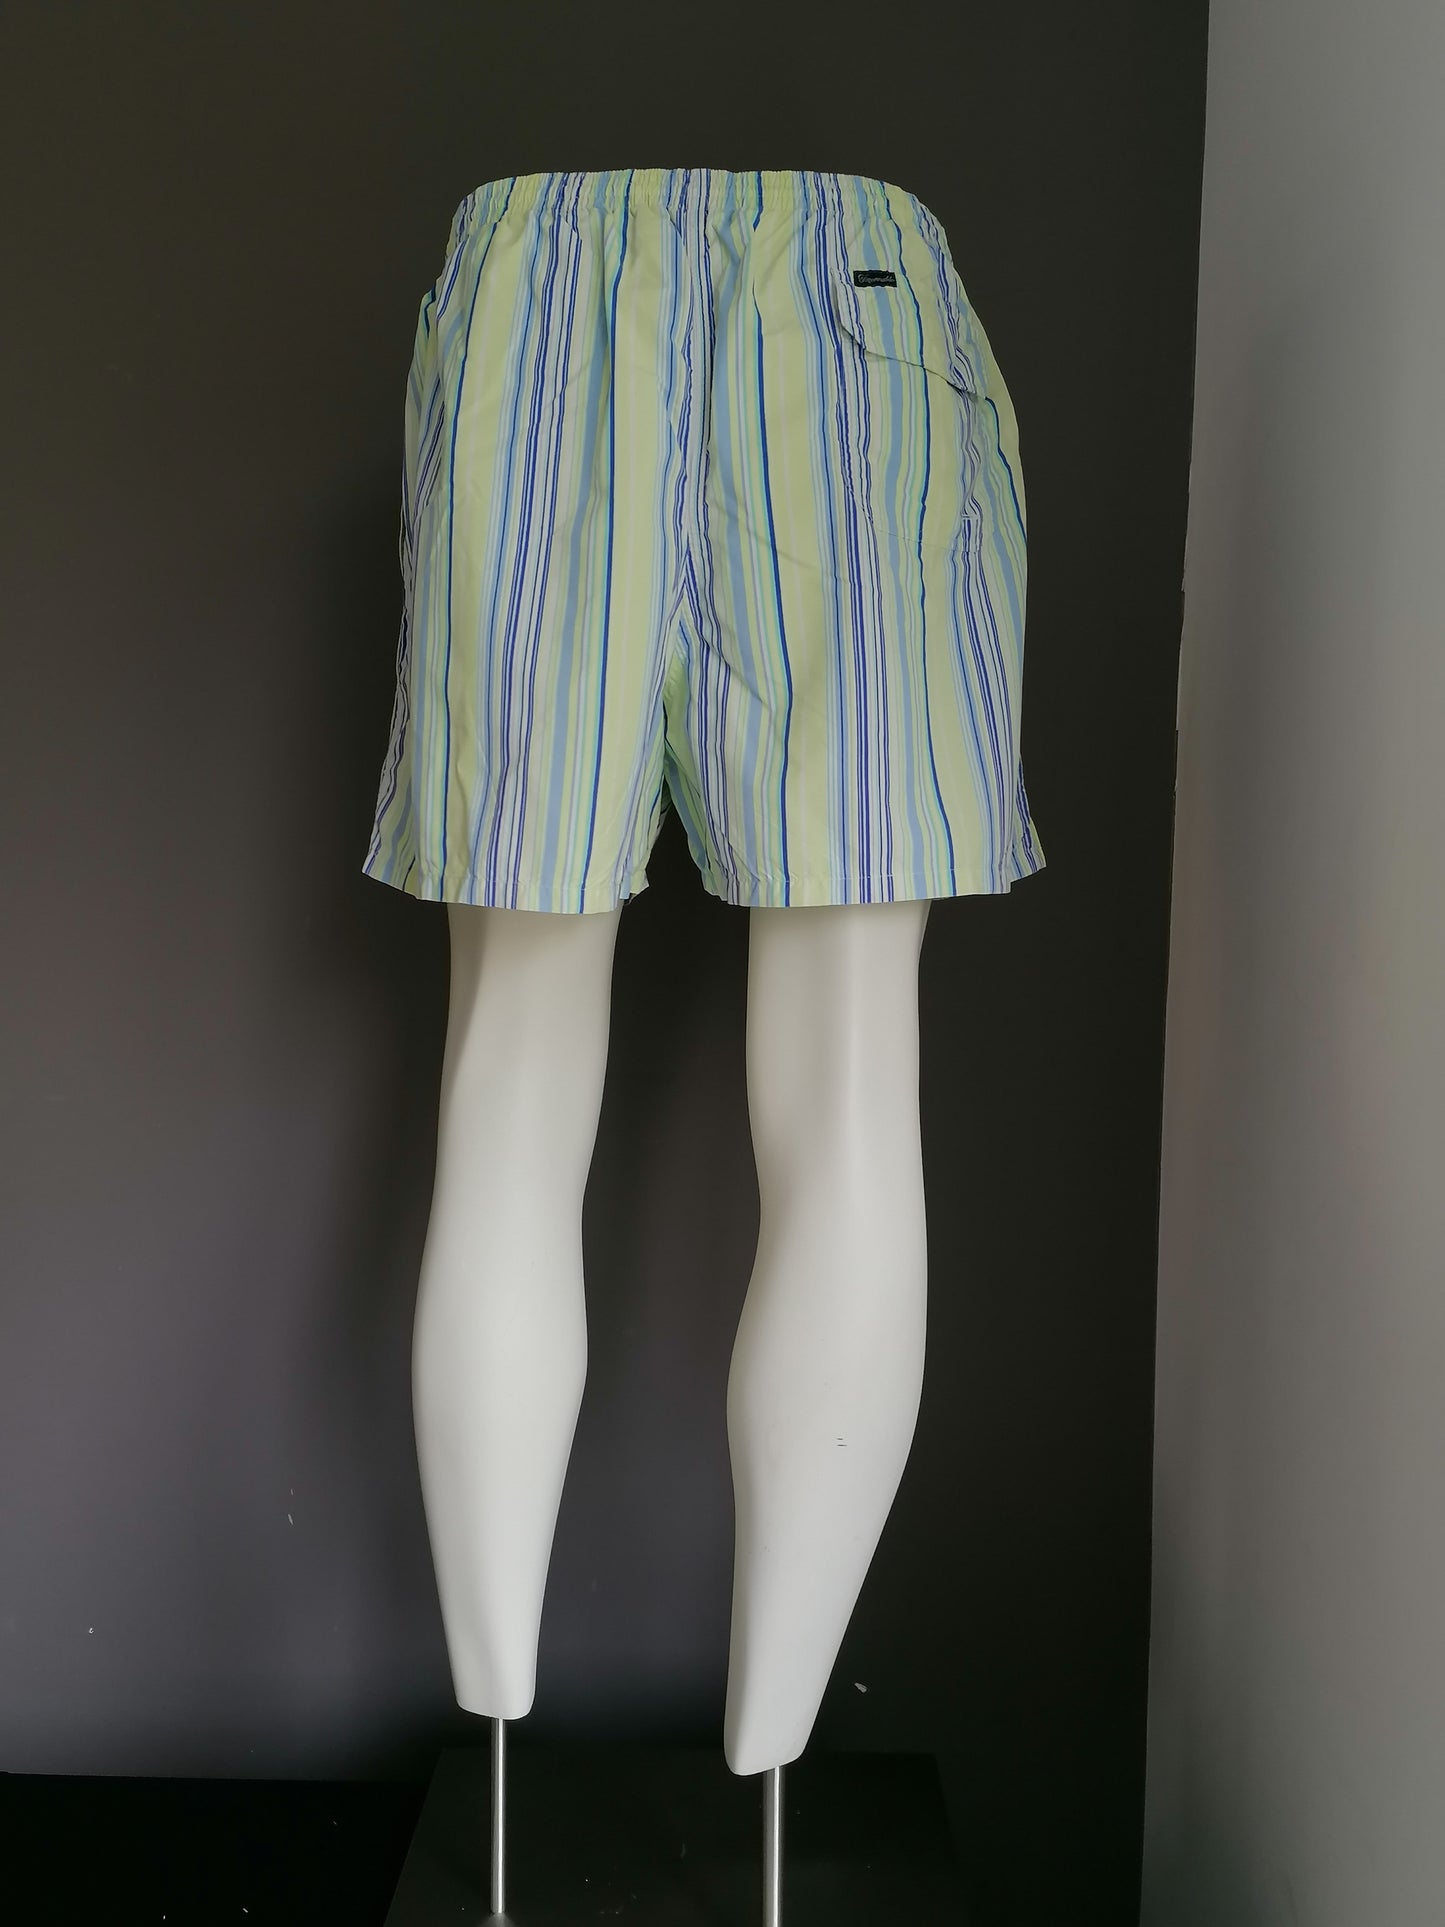 Faconnable swimming trunks / swimming shorts. Blue white green striped. Size XXL / 2XL.